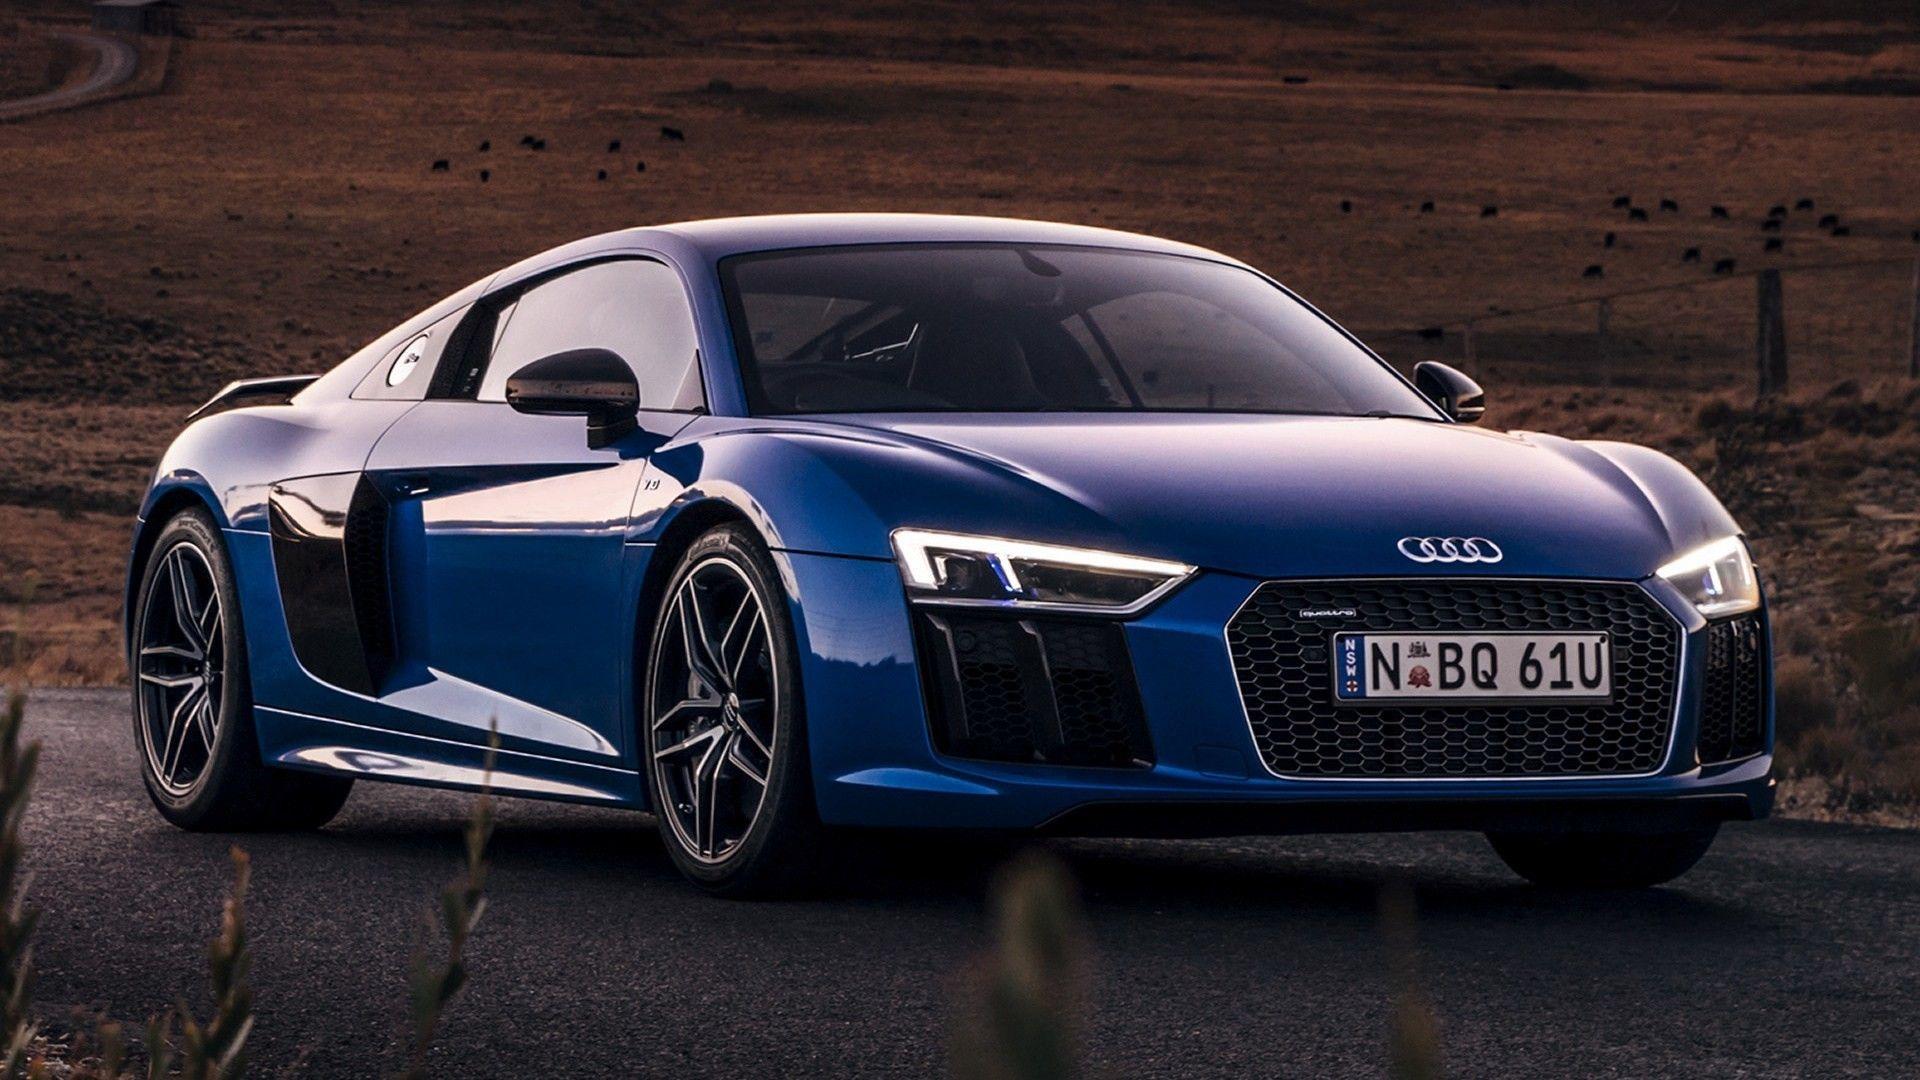 2018 Audi R8 Wallpapers Top Free 2018 Audi R8 Backgrounds Wallpaperaccess